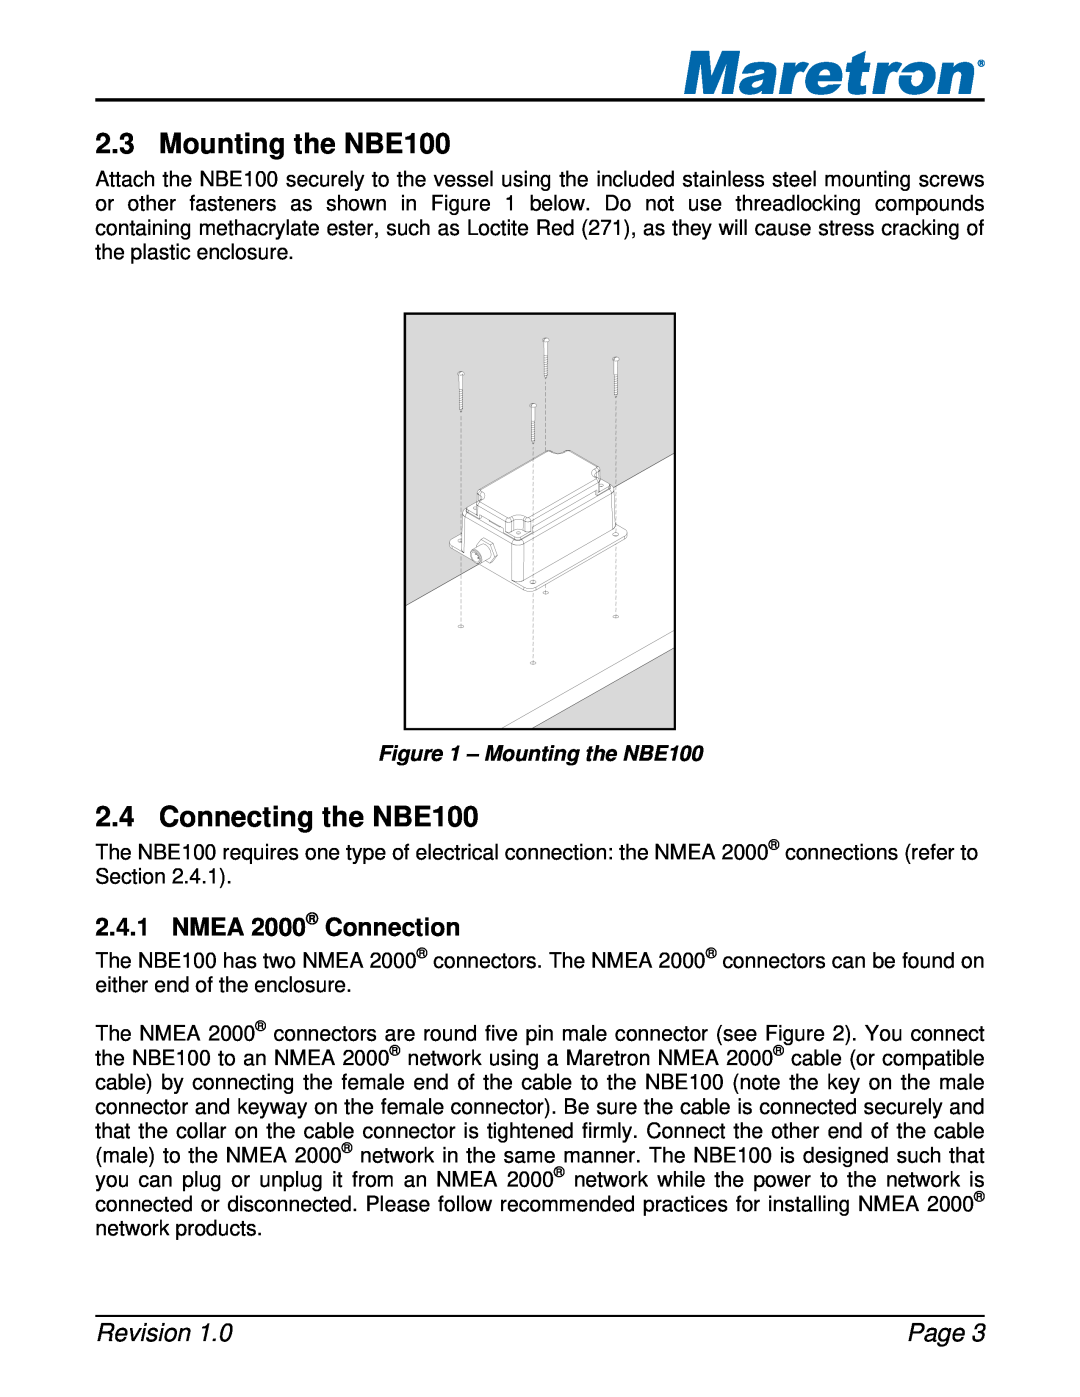 Maretron user manual Mounting the NBE100, Connecting the NBE100, NMEA 2000 Connection, Revision, Page 